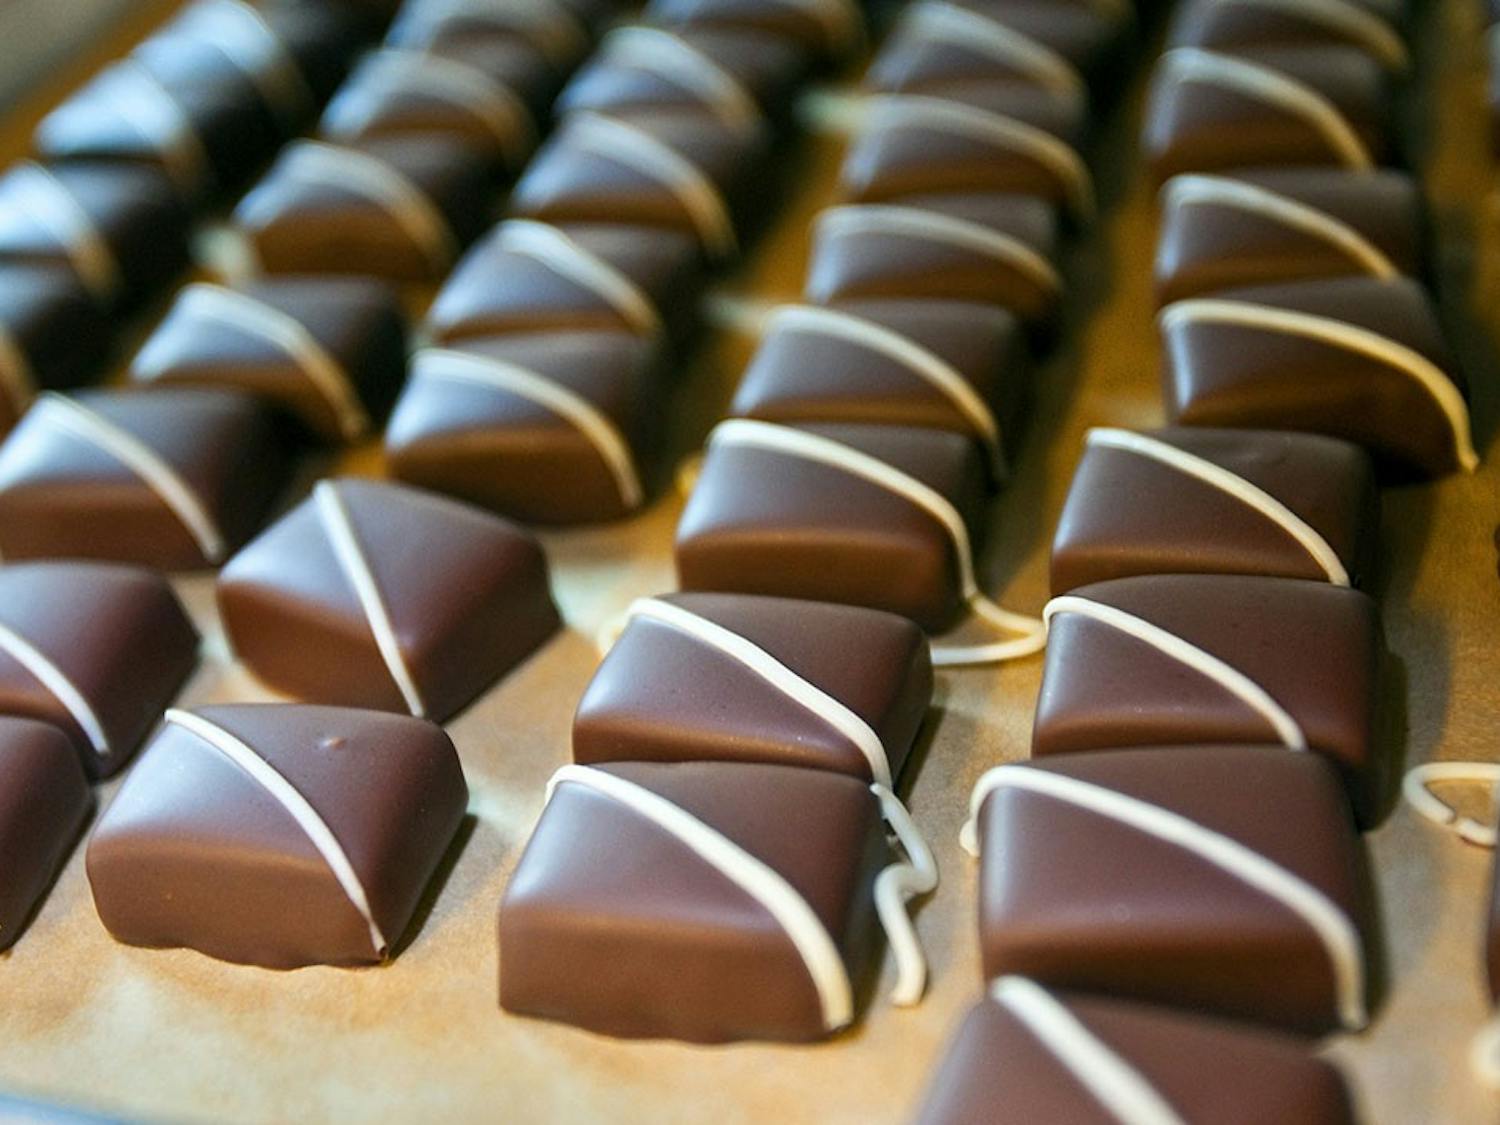 Organic, fair-trade Theo chocolates are stored on trays after cooling in Freemont, Washington